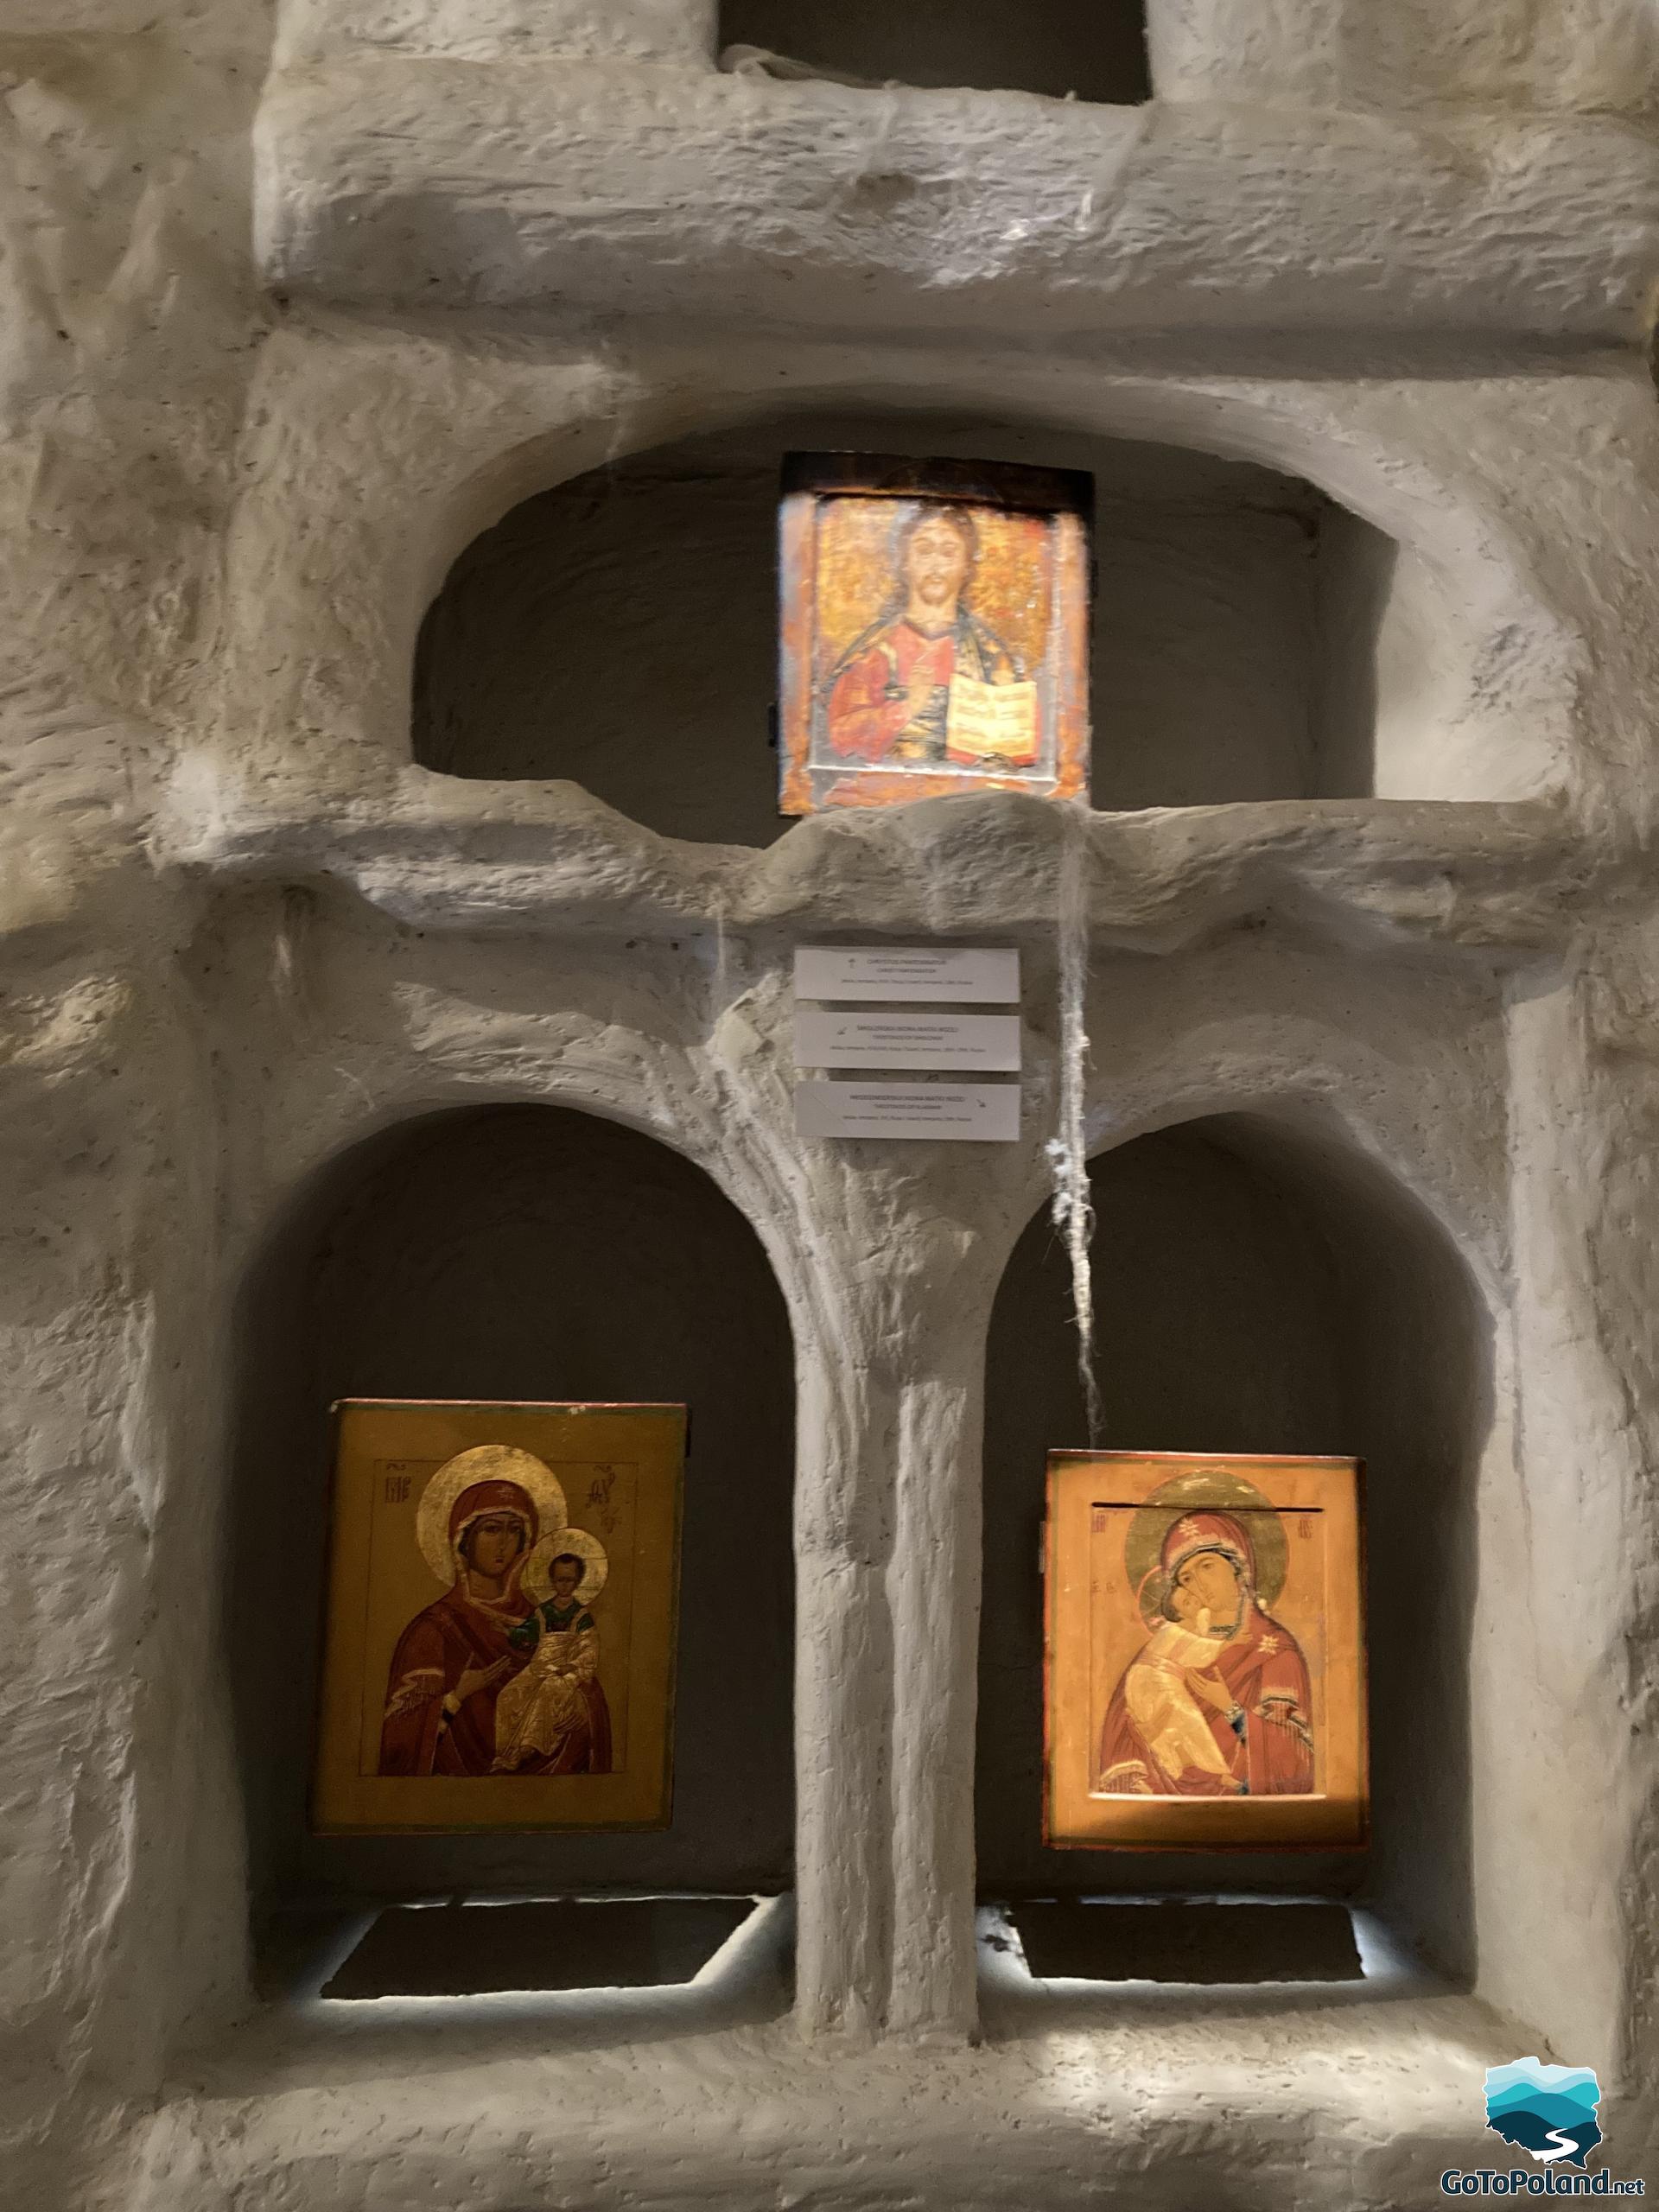 three icons close up in a room stylized as a hermits cave